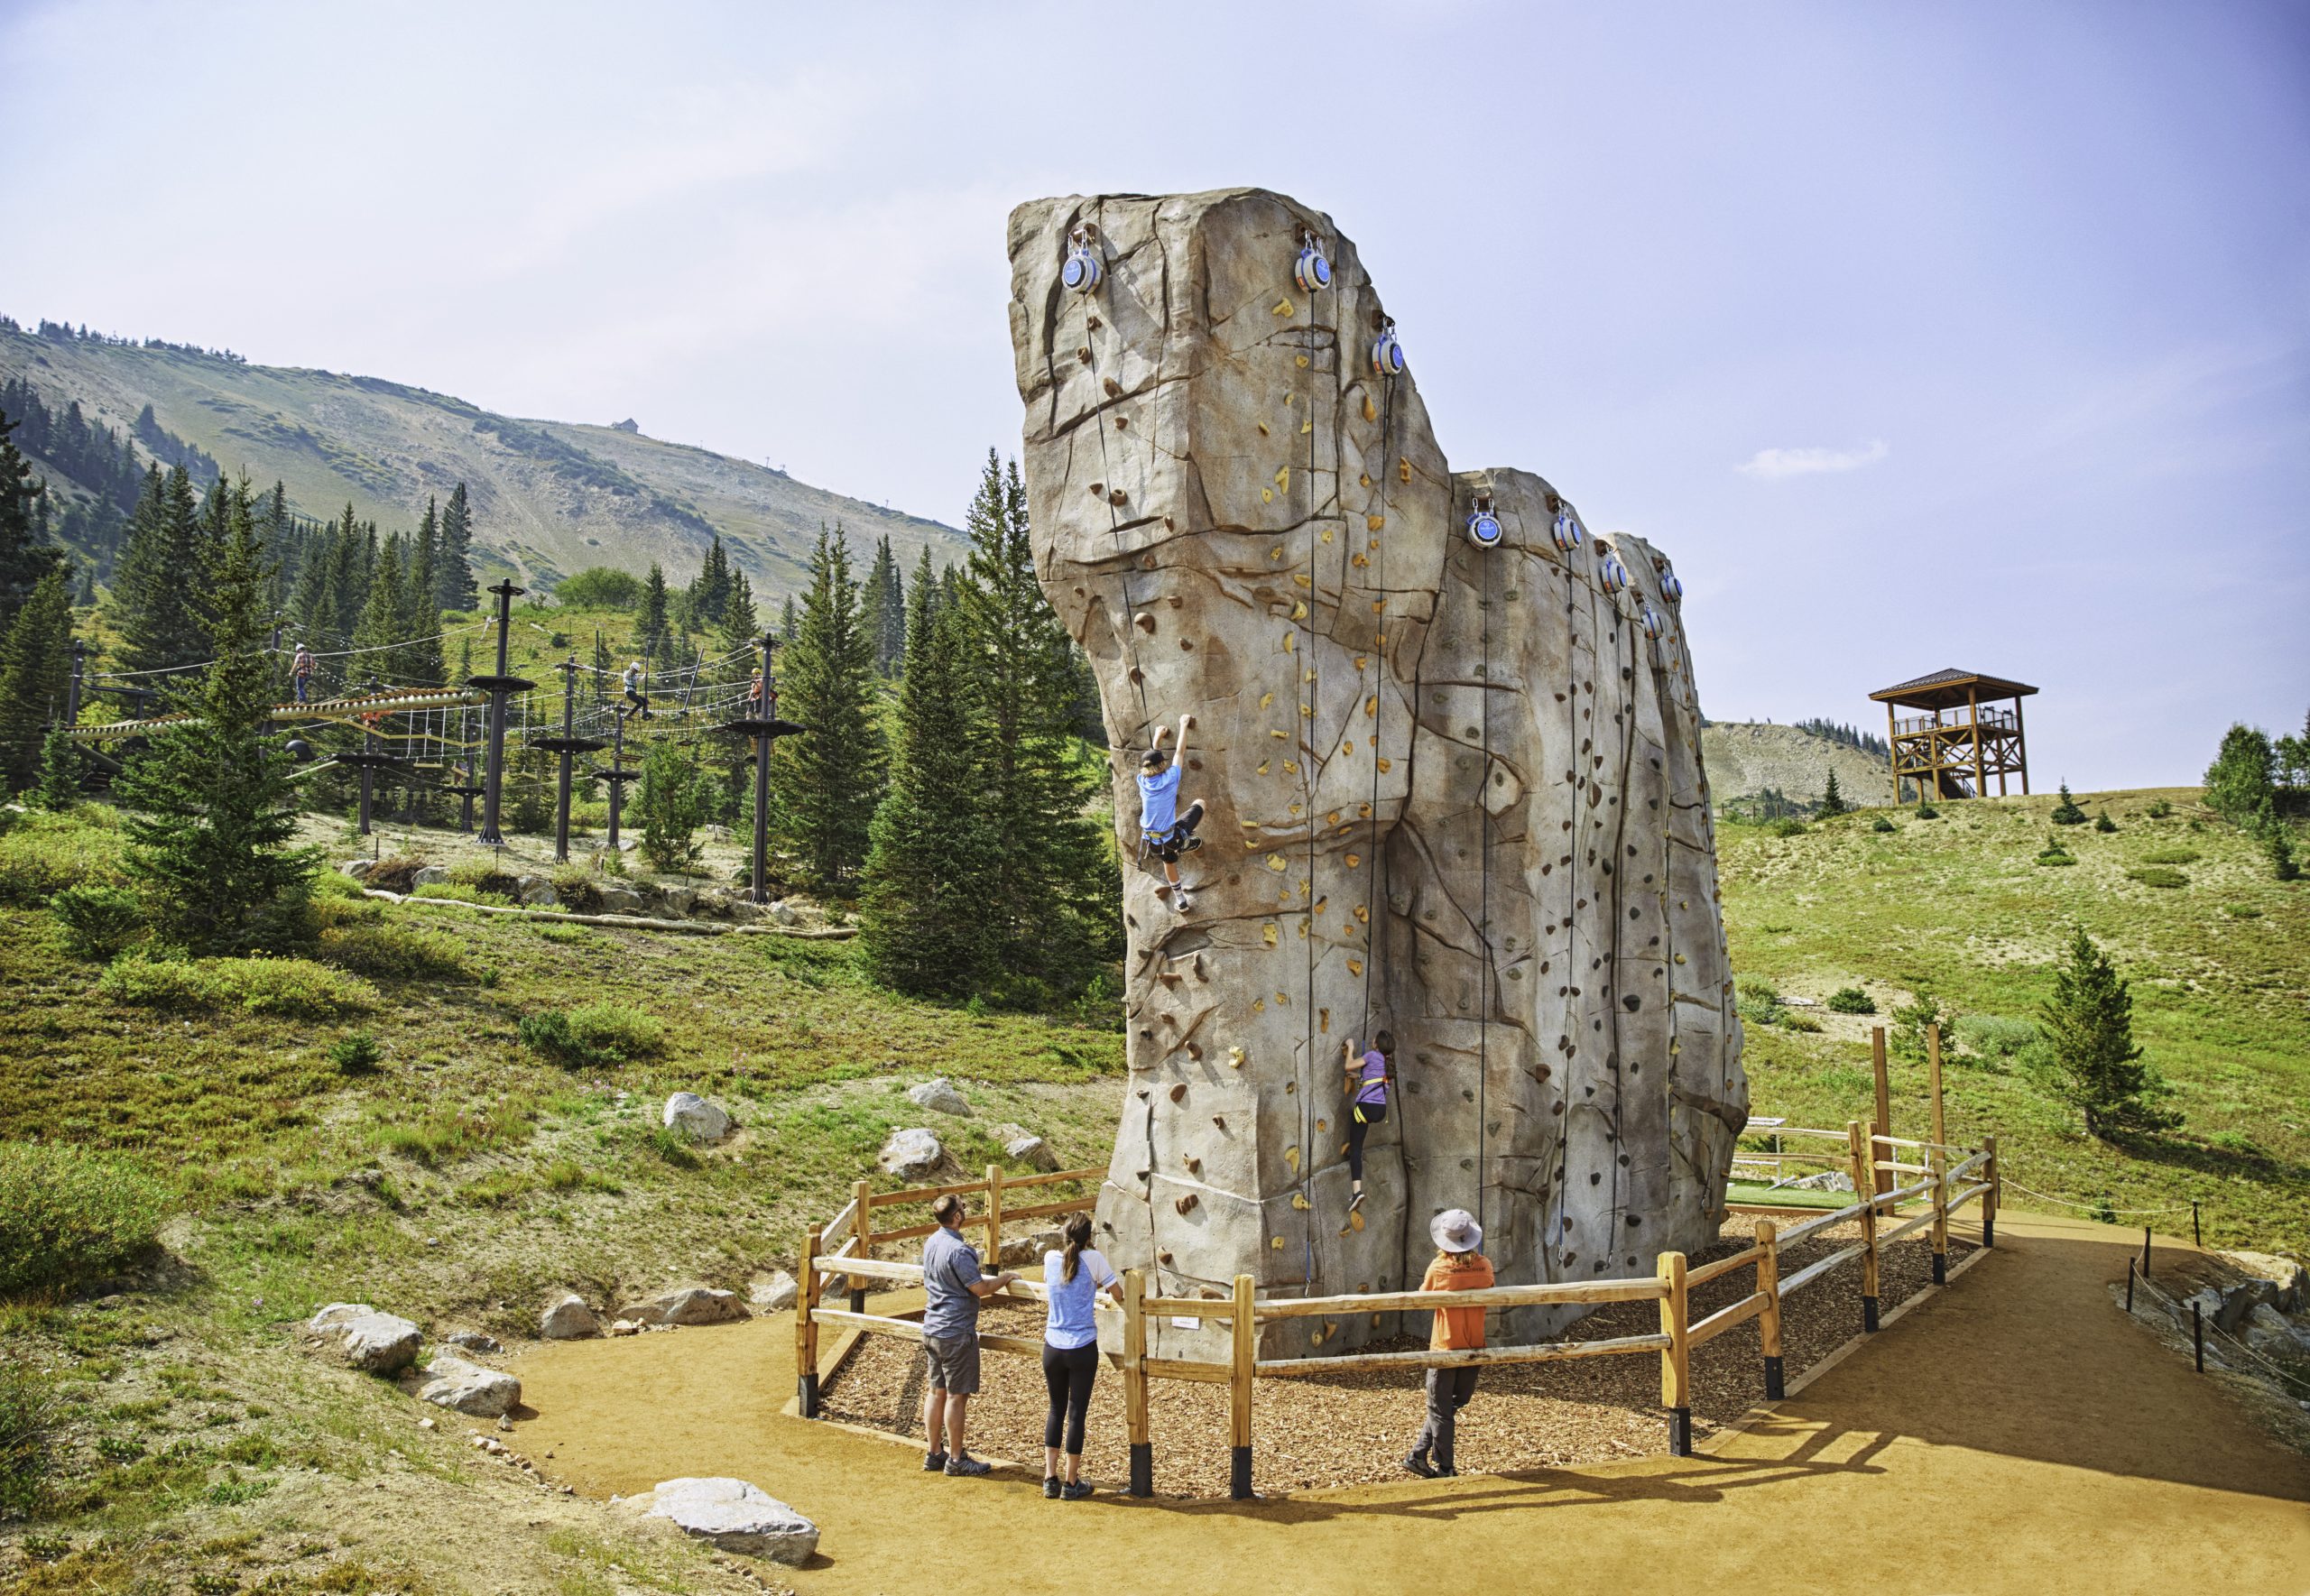 Children climbing up a rock climbing wall at the Epic Discovery on a sunny summer day in Breckenridge.